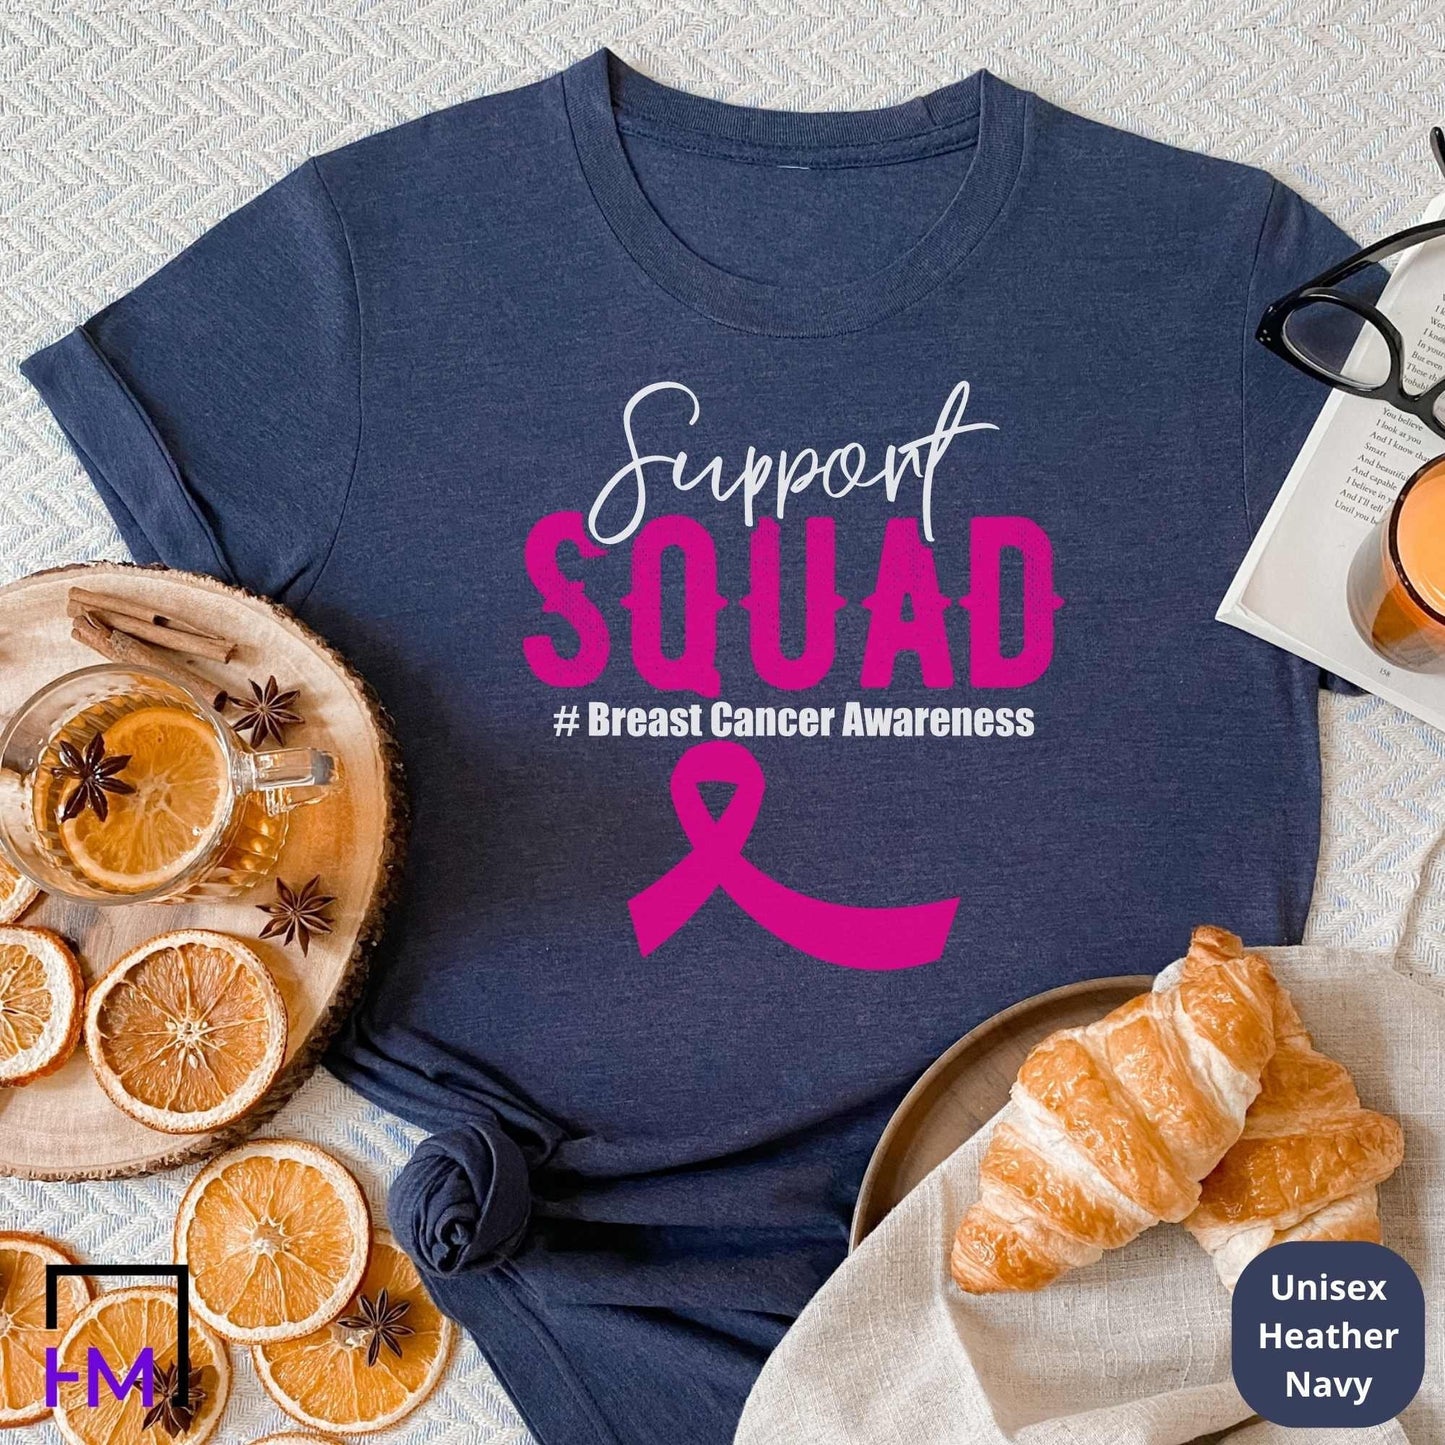 Support Squad Fight Cancer T-shirt, World Cancer Awareness Gift, Breast Cancer Ribbon, Survivor Sweater, Cancer in Every Color Sweatshirt HMDesignStudioUS